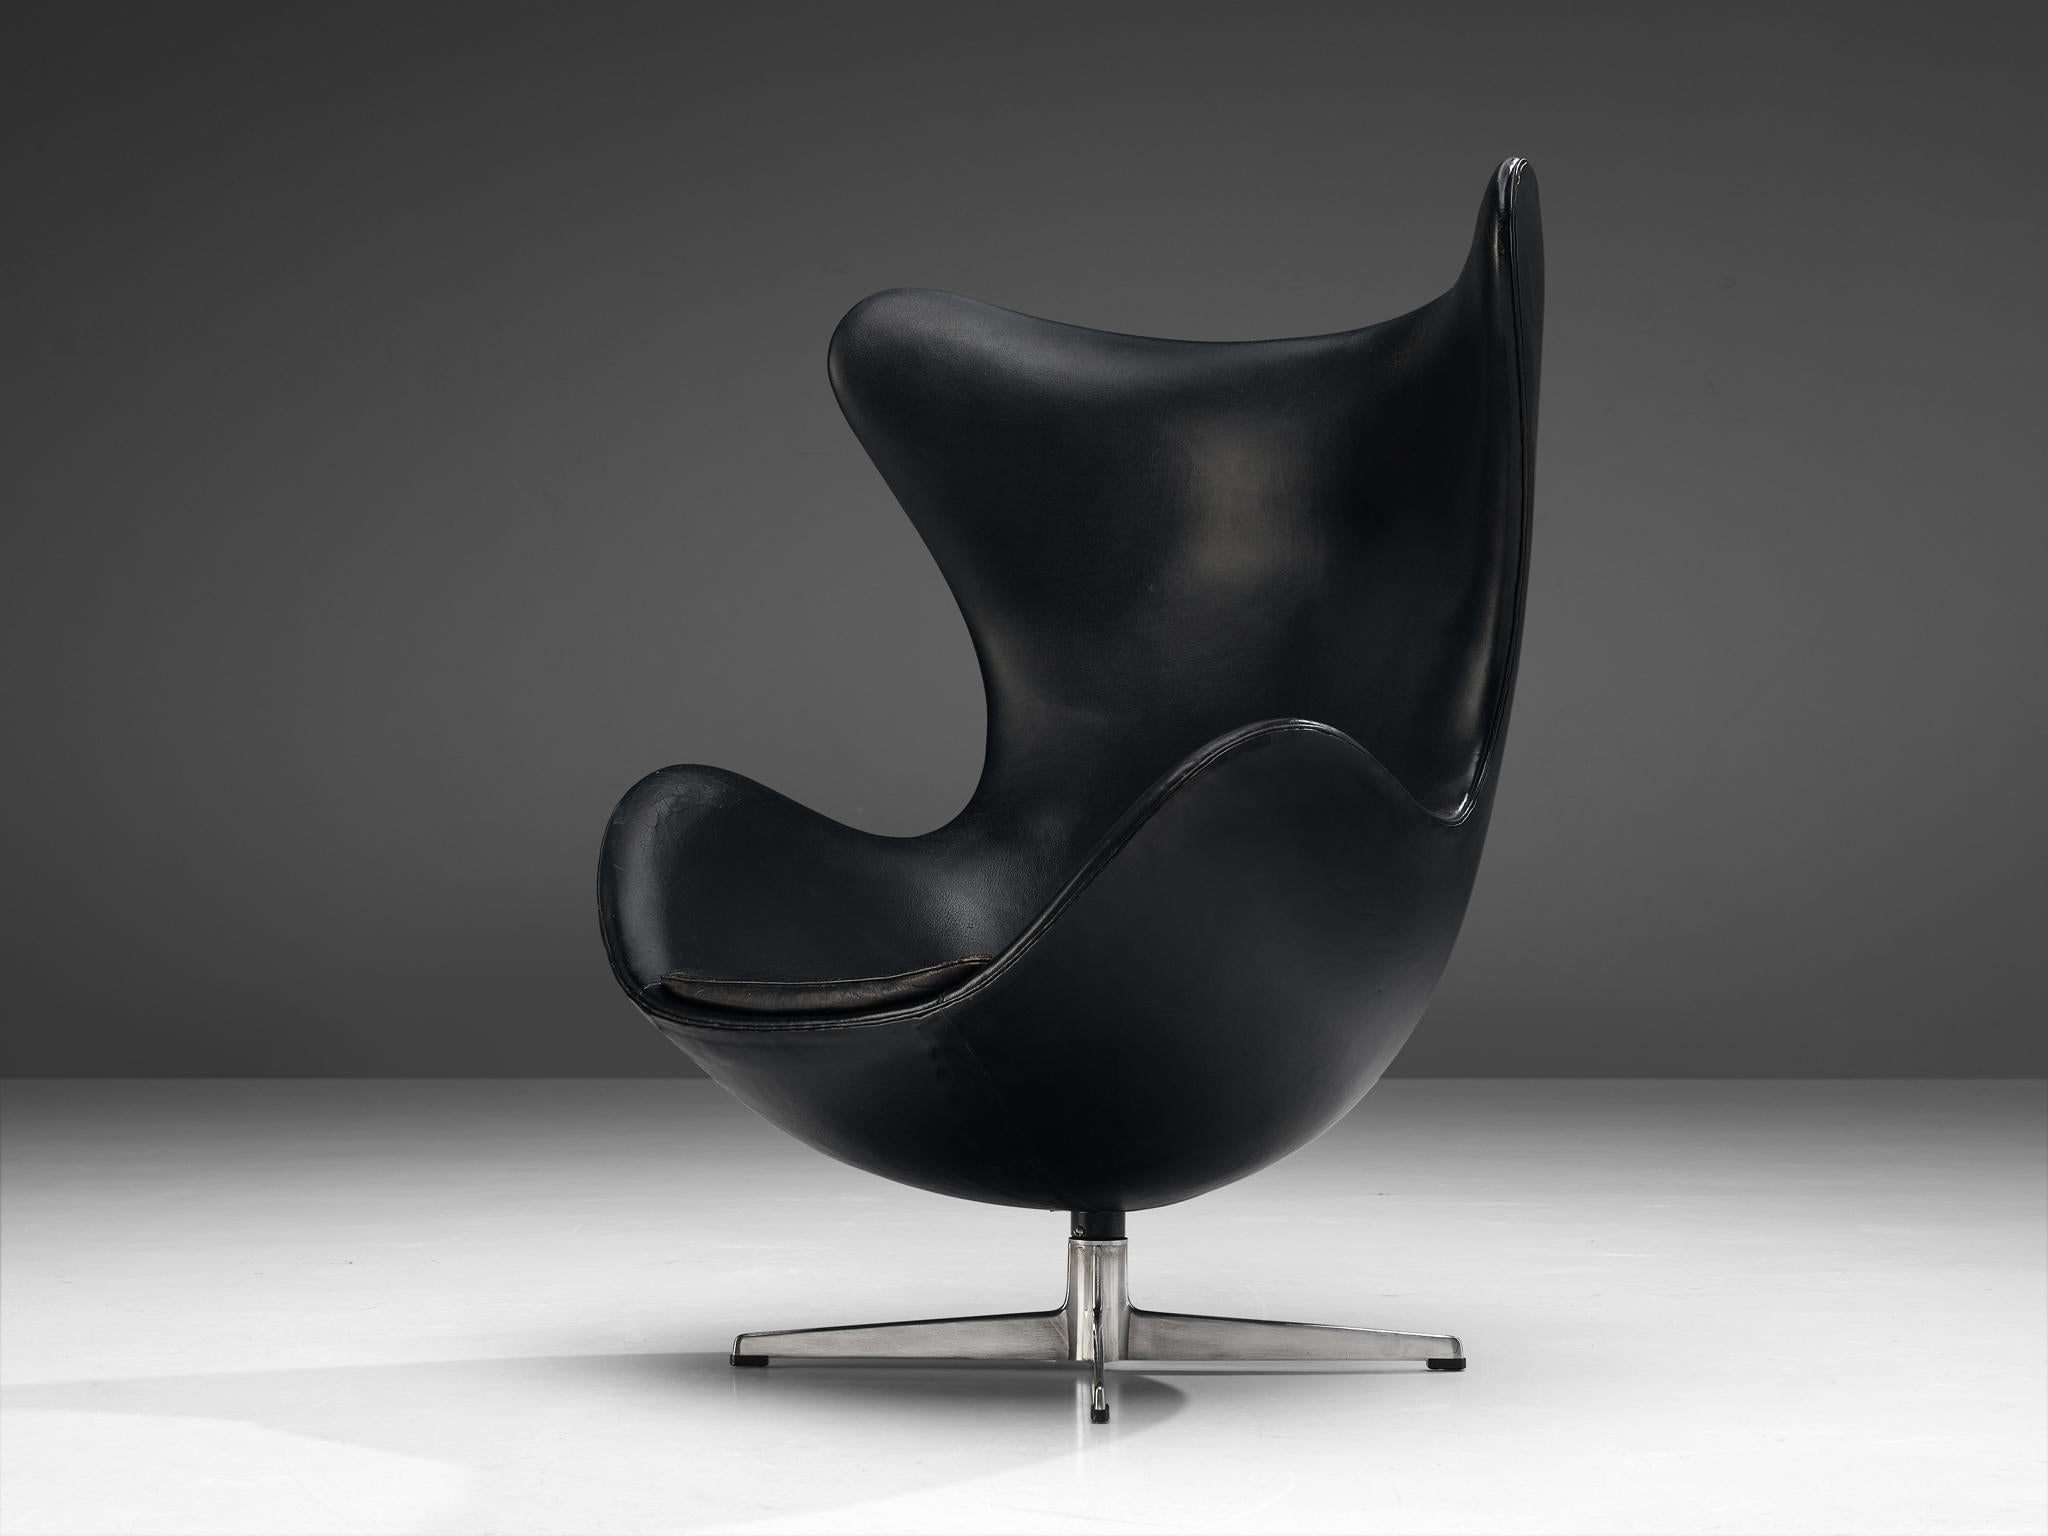 Arne Jacobsen for Fritz Hansen, early 'egg' lounge chair, model 3316, leather, steel, Denmark, design 1958, produced 1966.

This chair is one of the most iconic designs in the history of Danish design. This chair was originally designed for the SAS